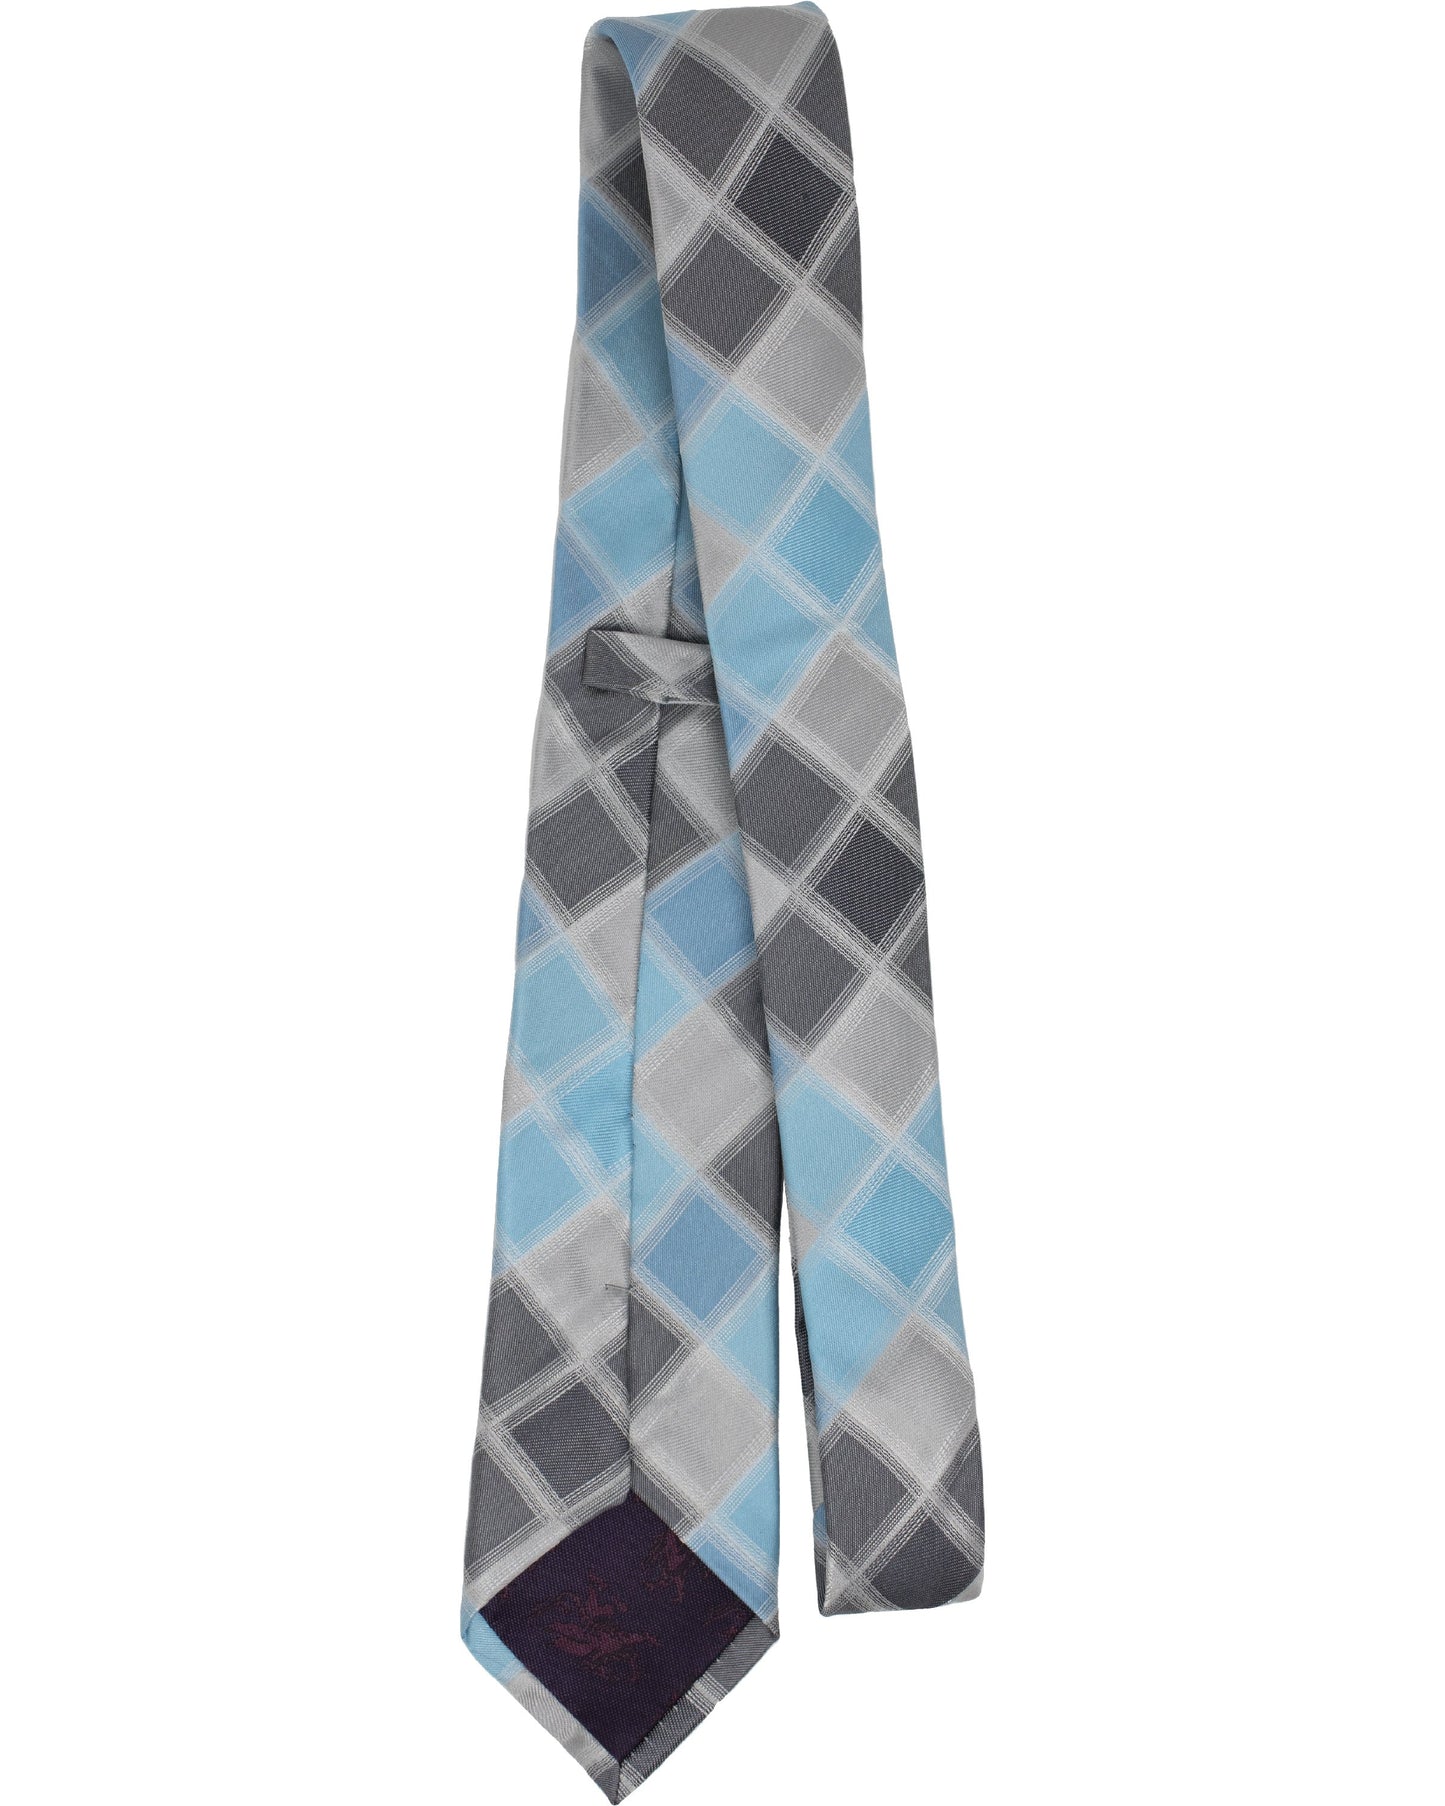 Archie Aqua Tie - Lords Of Harlech